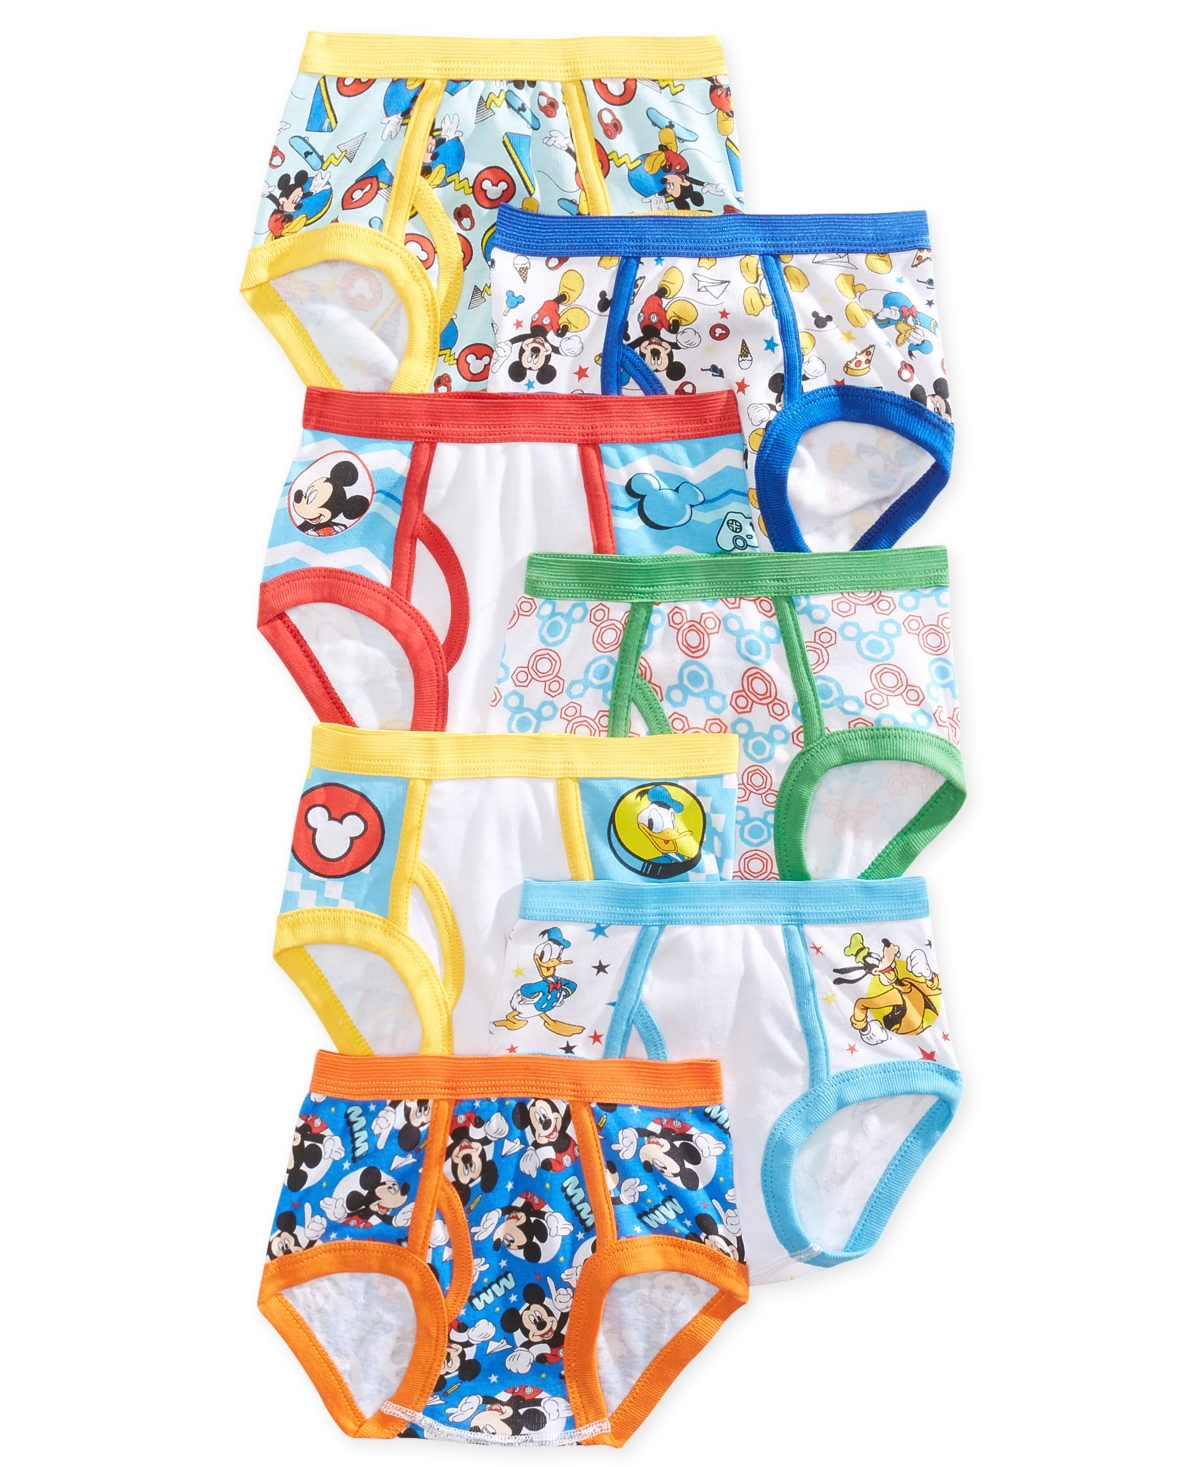 UPC 045299075902 product image for Disney's Mickey Mouse 7-Pk. Cotton Briefs, Toddler Boys | upcitemdb.com